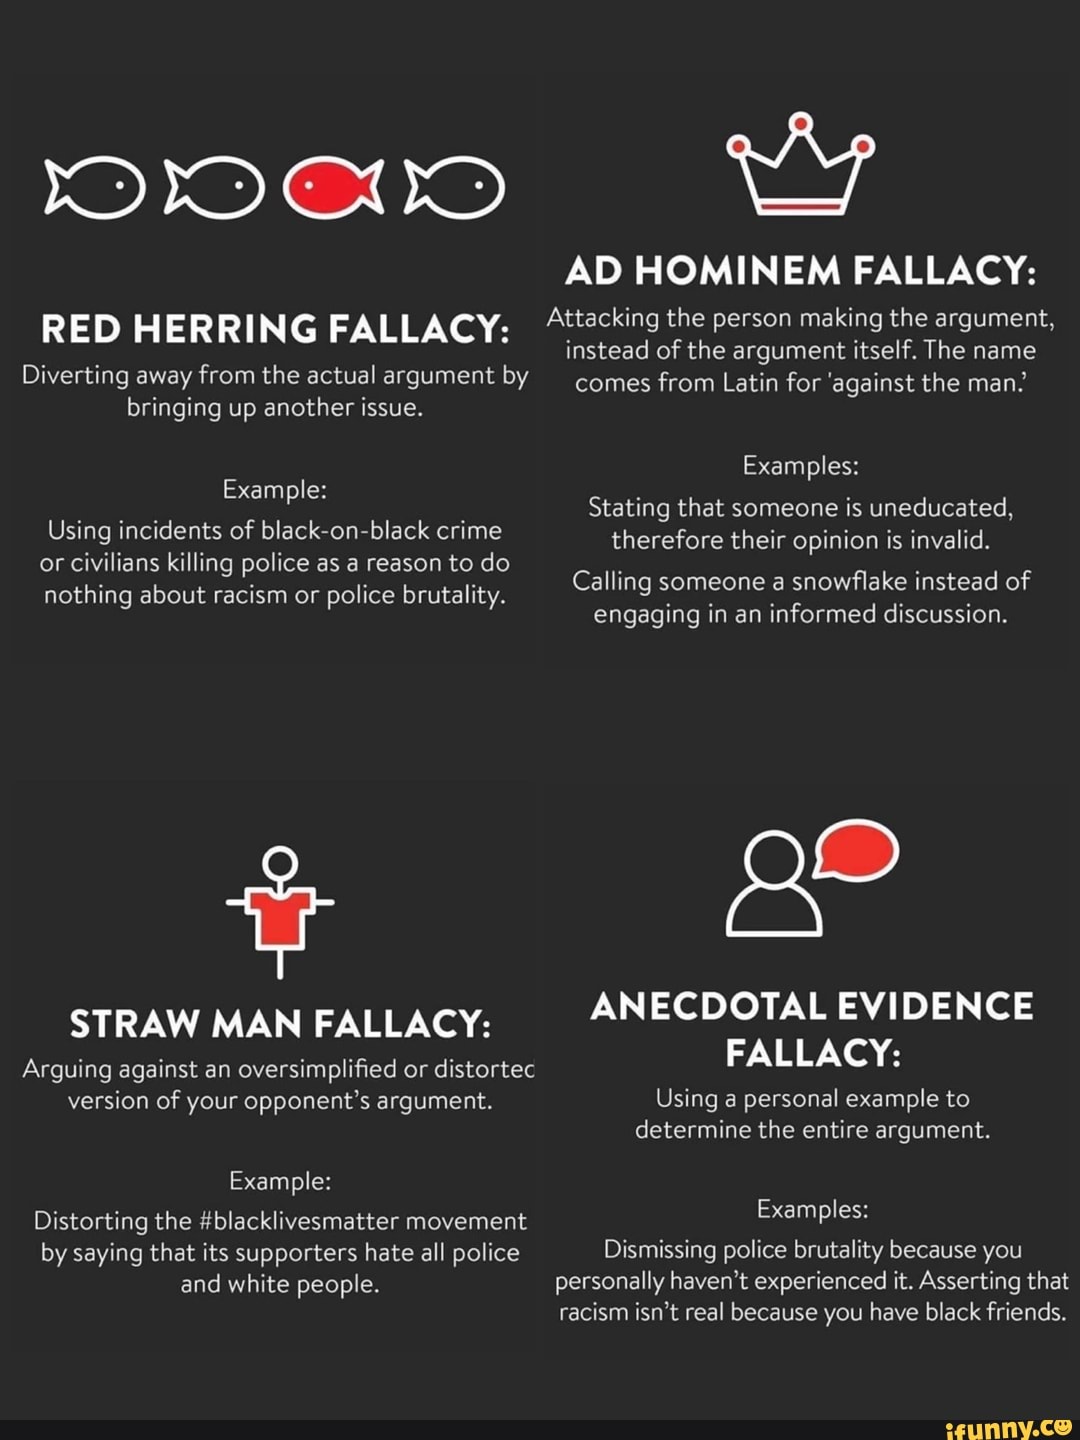 red herring fallacy examples in the news